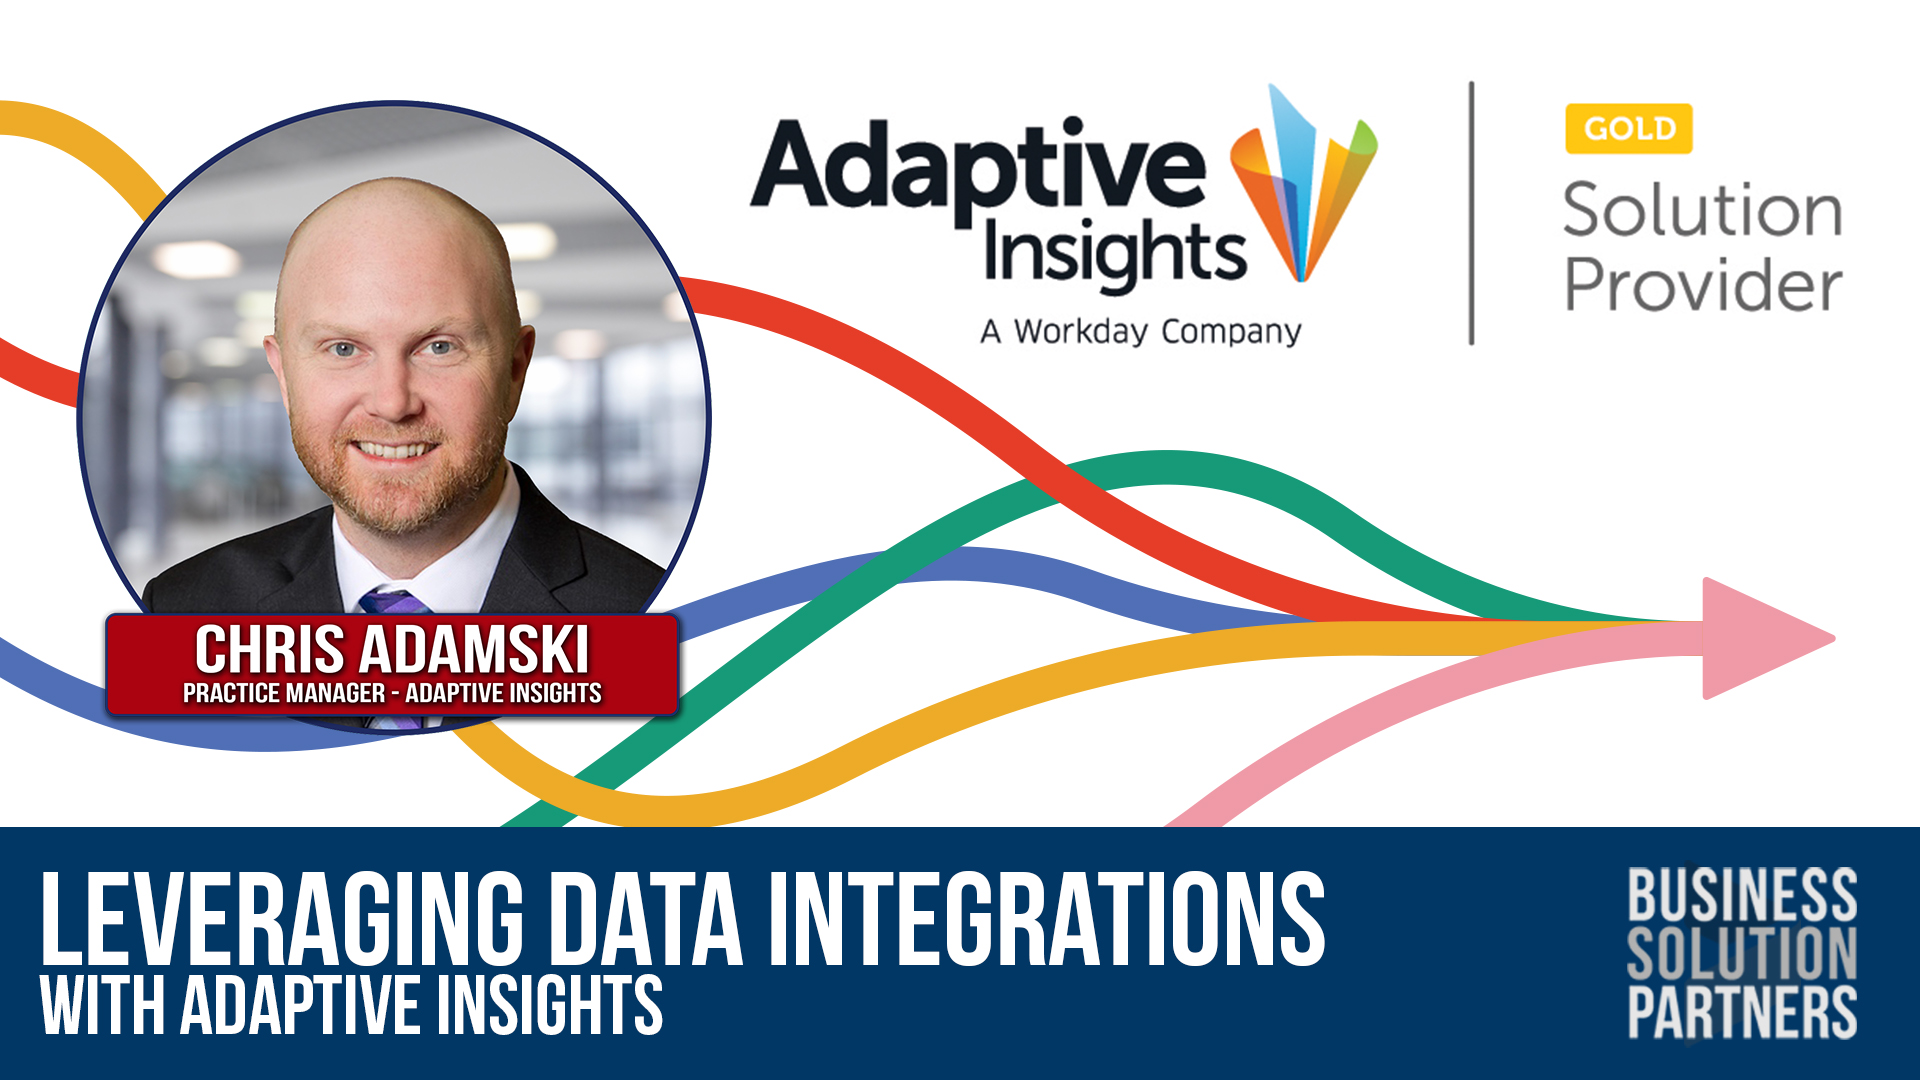 Adaptive Video Tutorial: Leveraging Data Integrations with Adaptive Insights